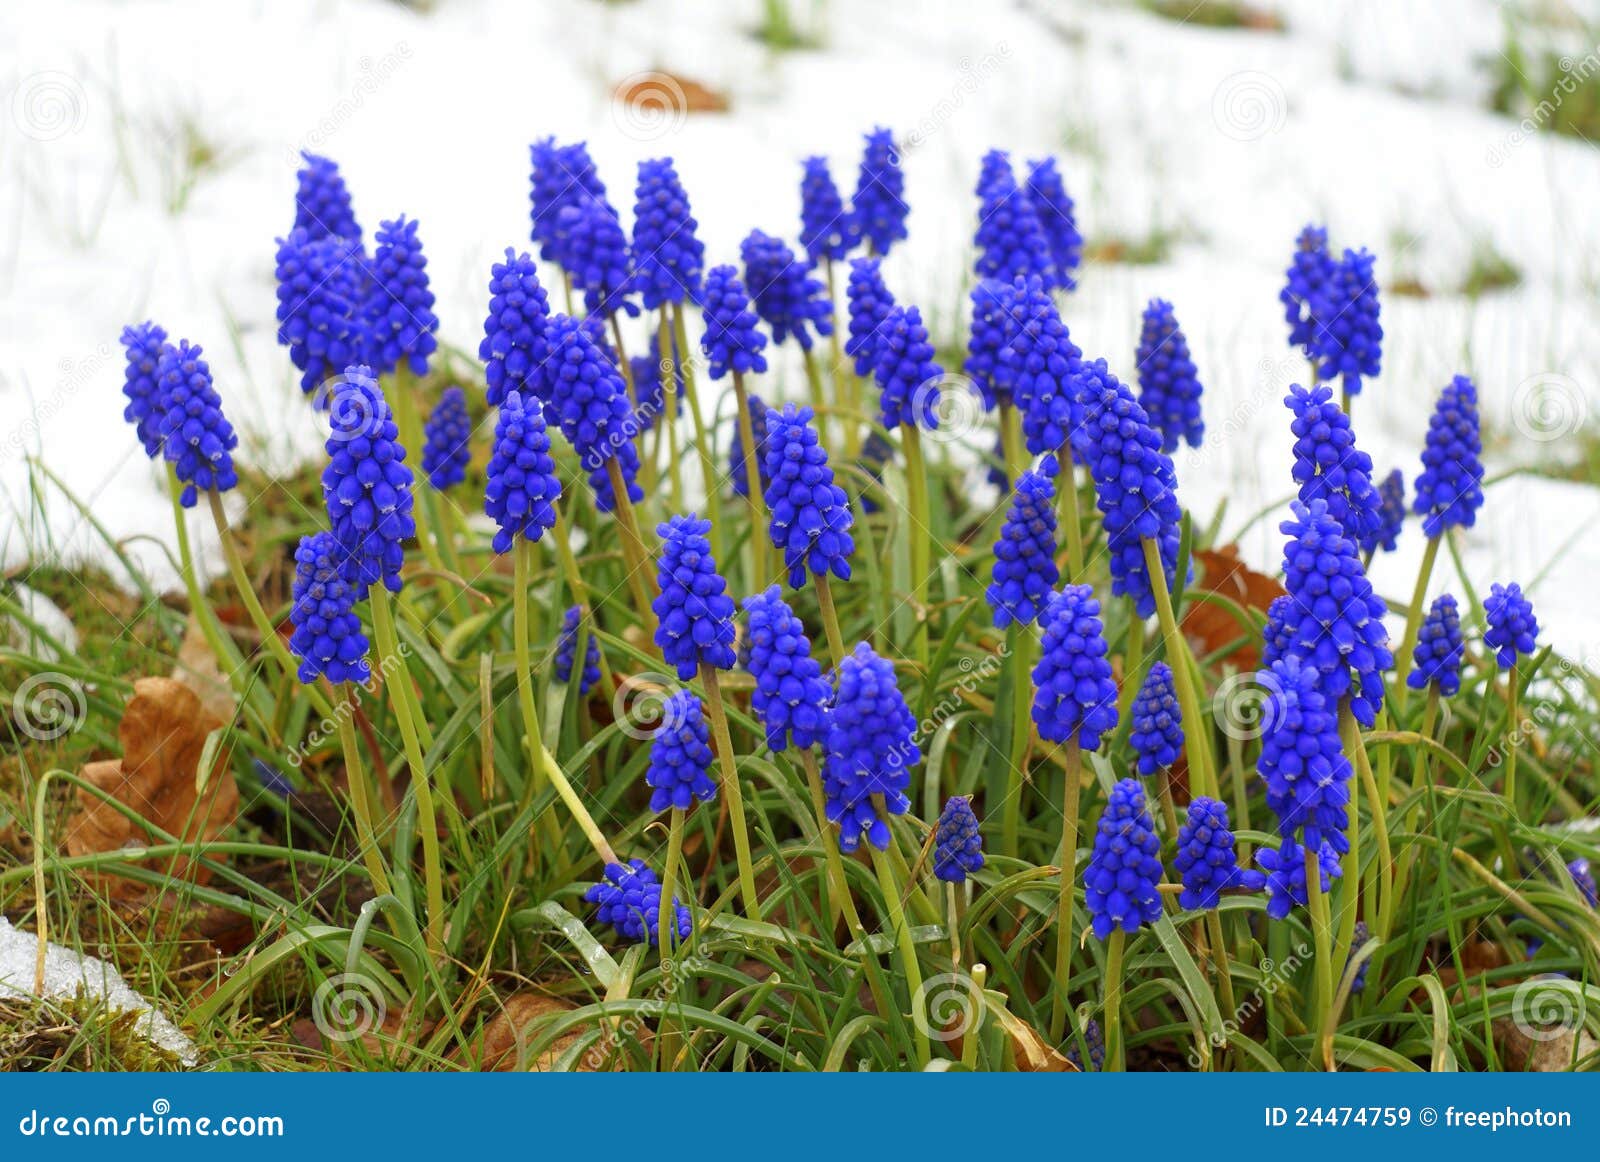 blue grape hyacinths in the snow, muscari flowers